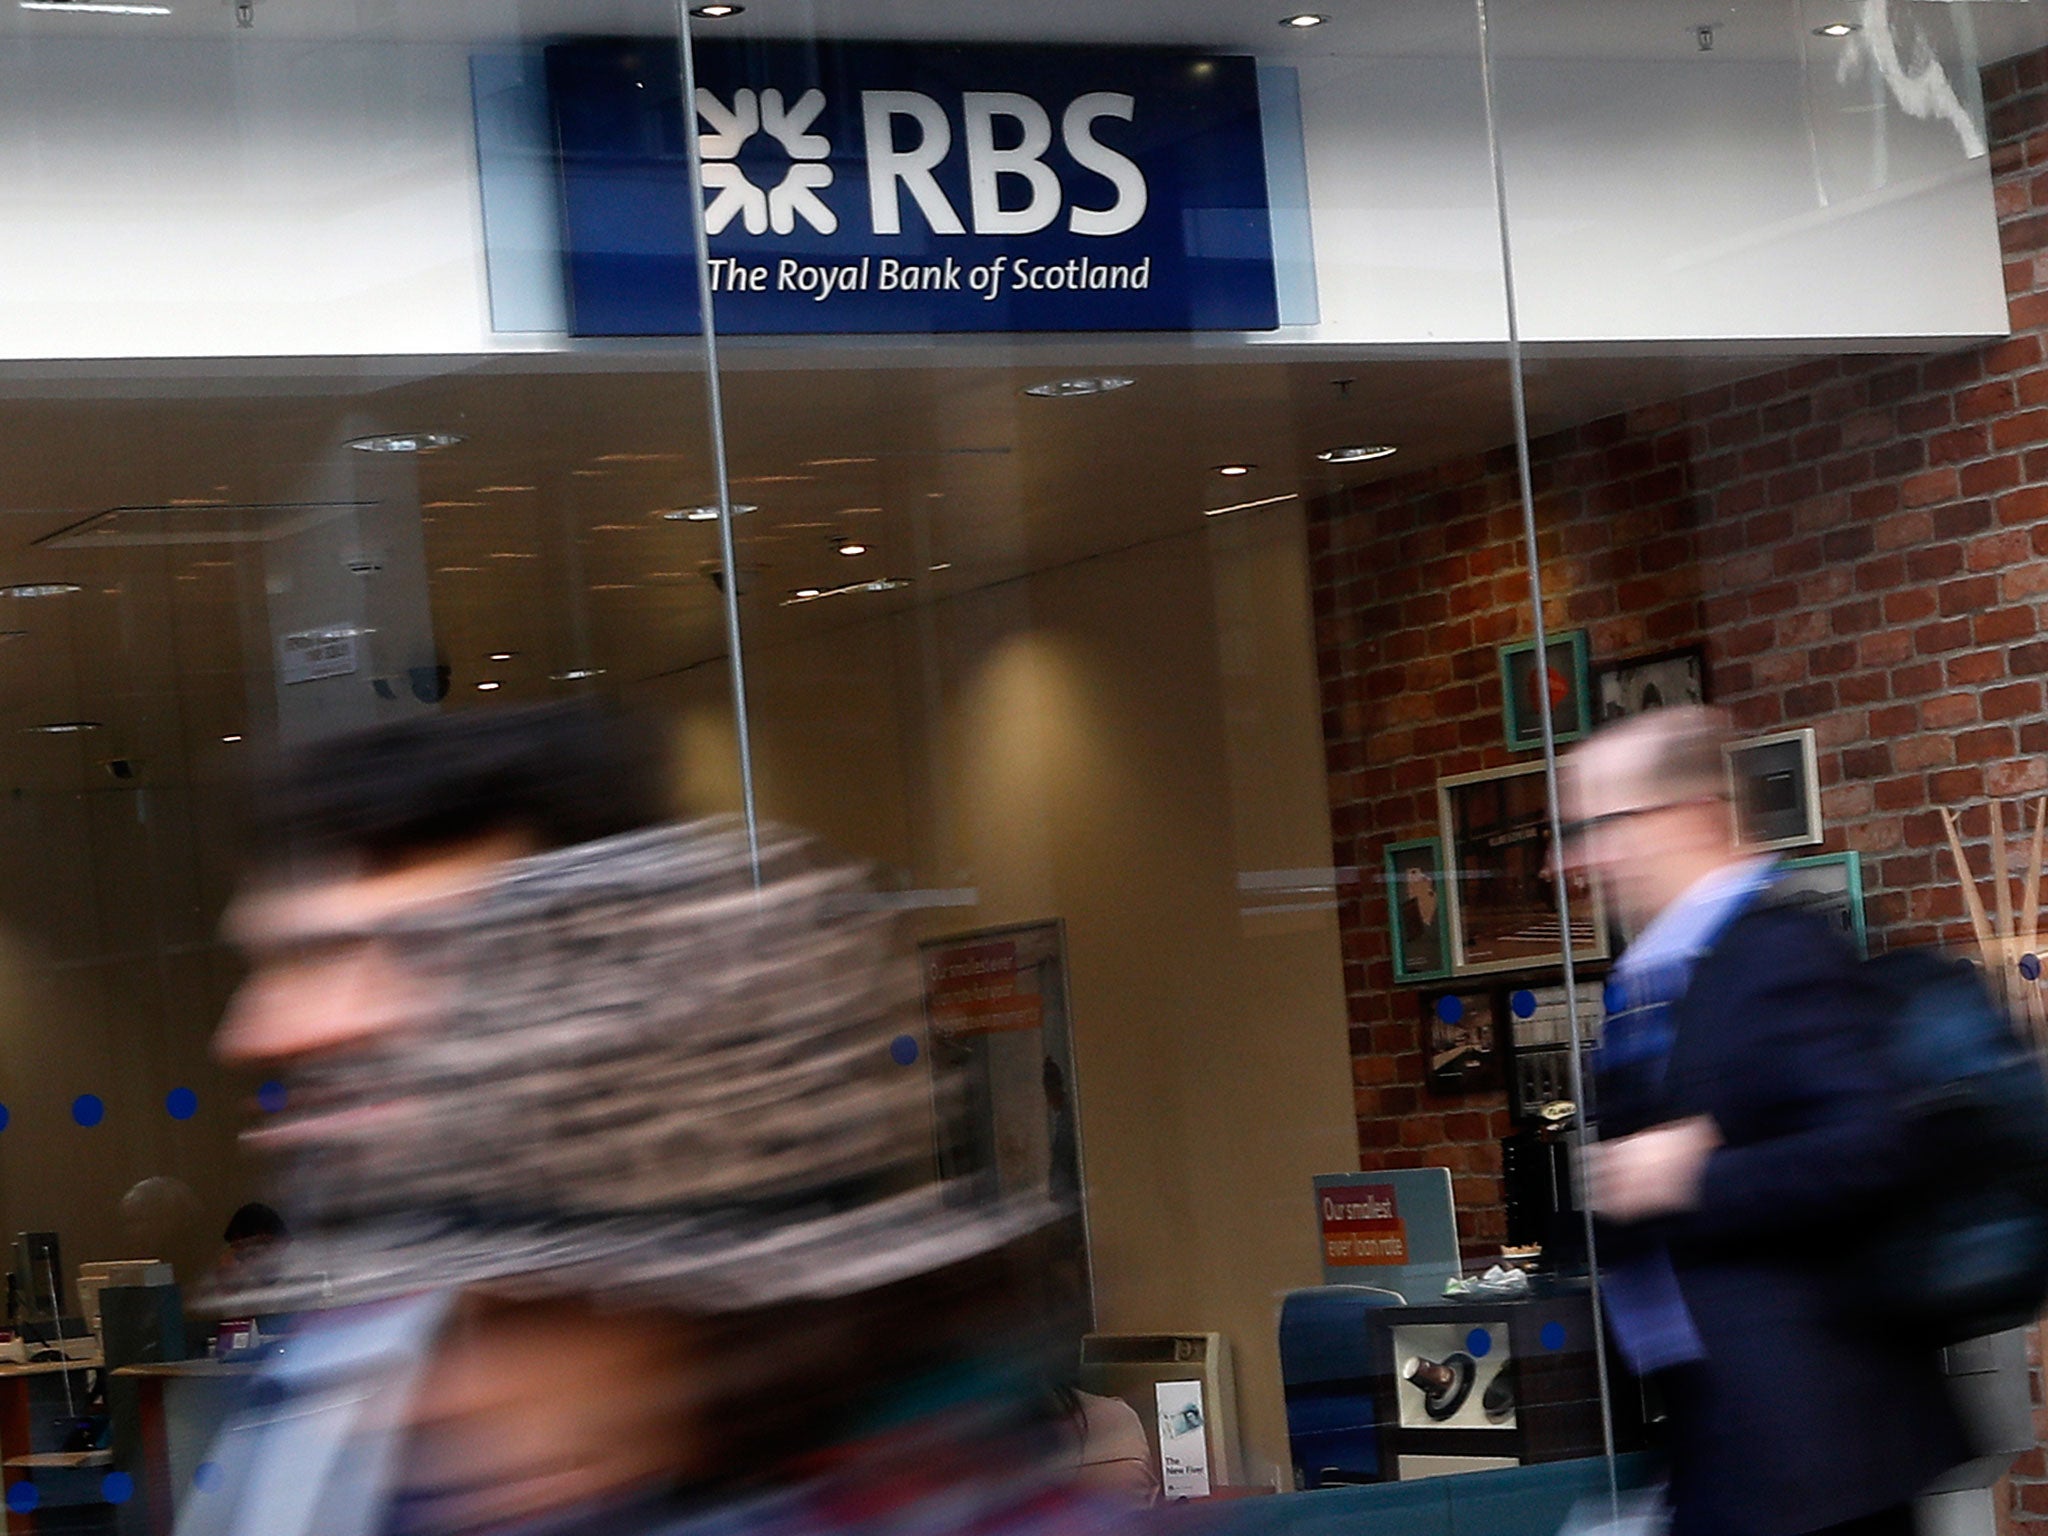 The closure of RBS branches like this one is making customers unhappy